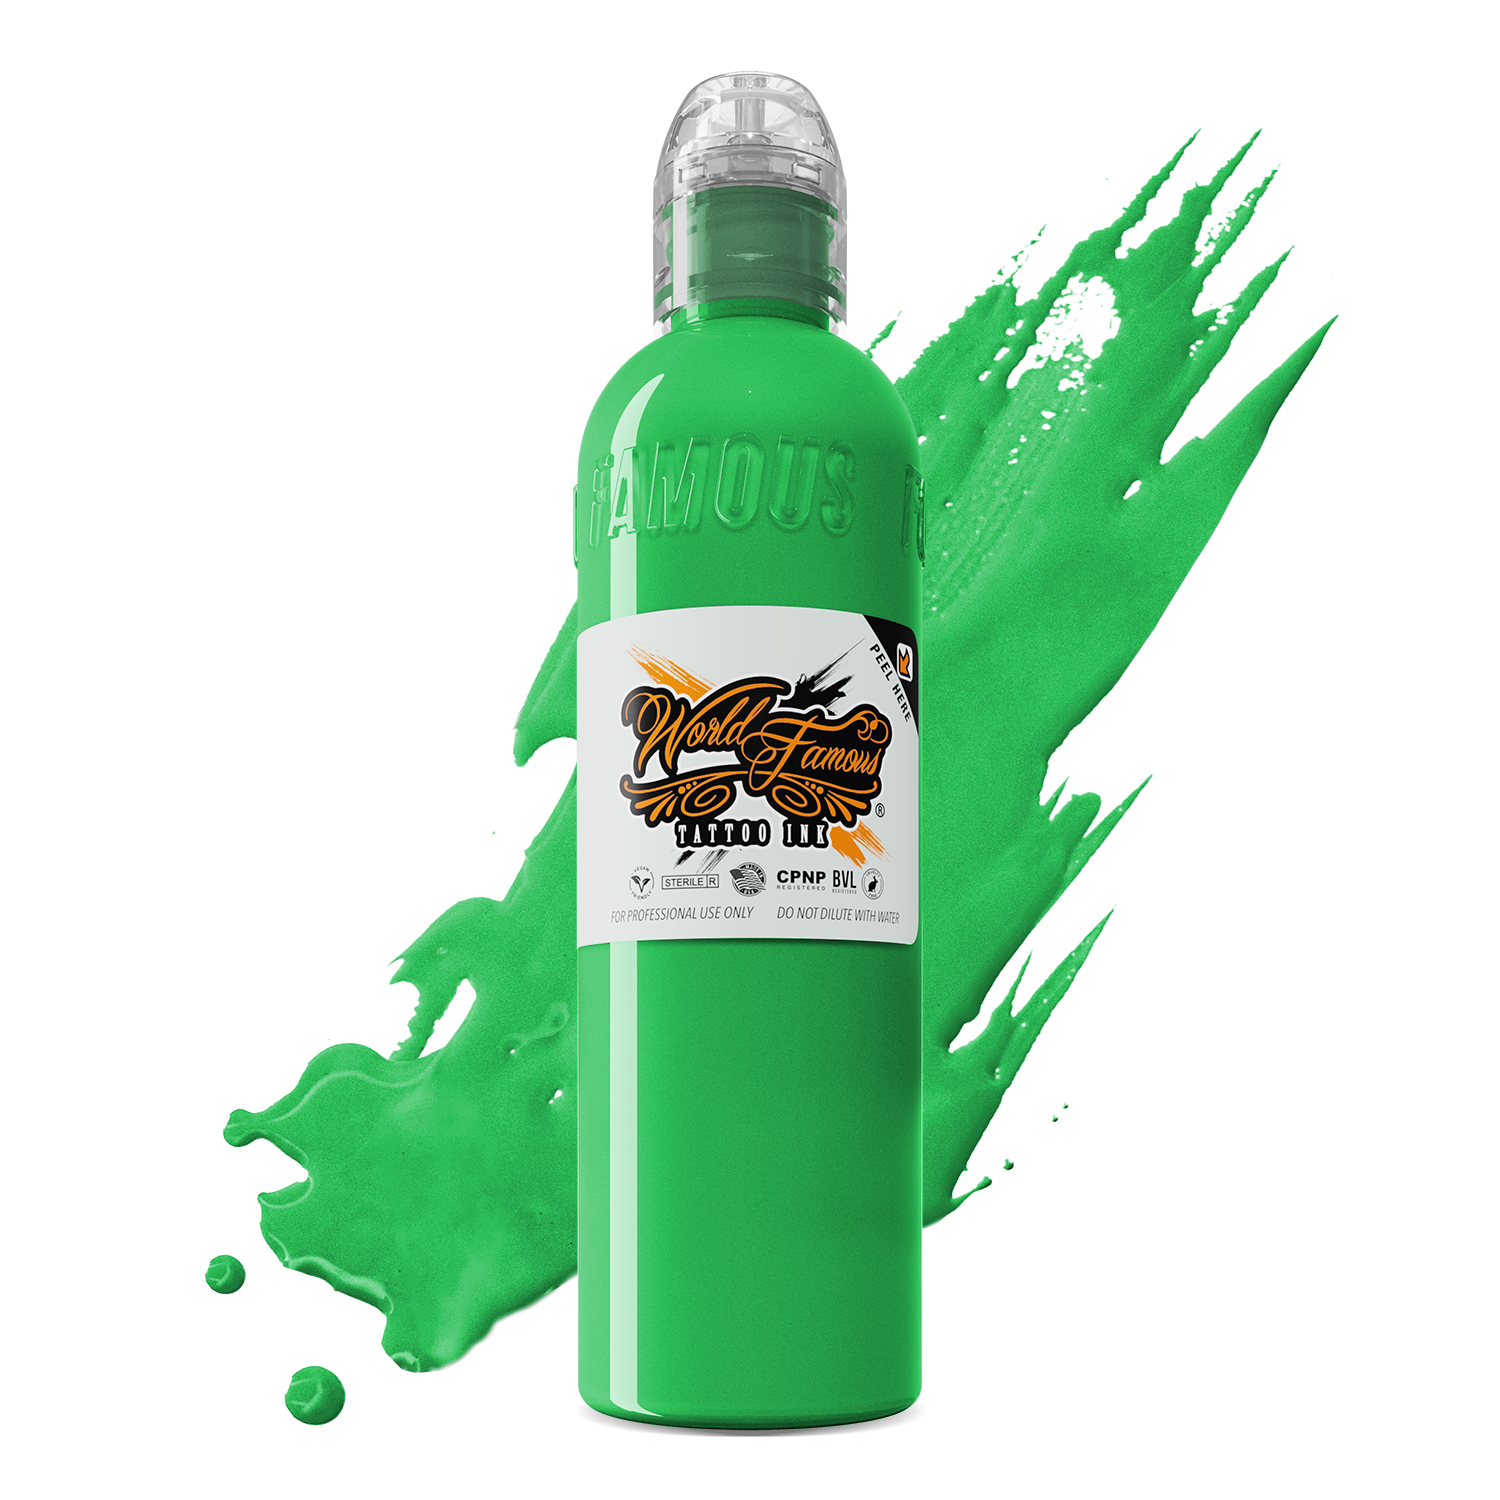 World Famous - Mint Green - Ultimate Tattoo Supply